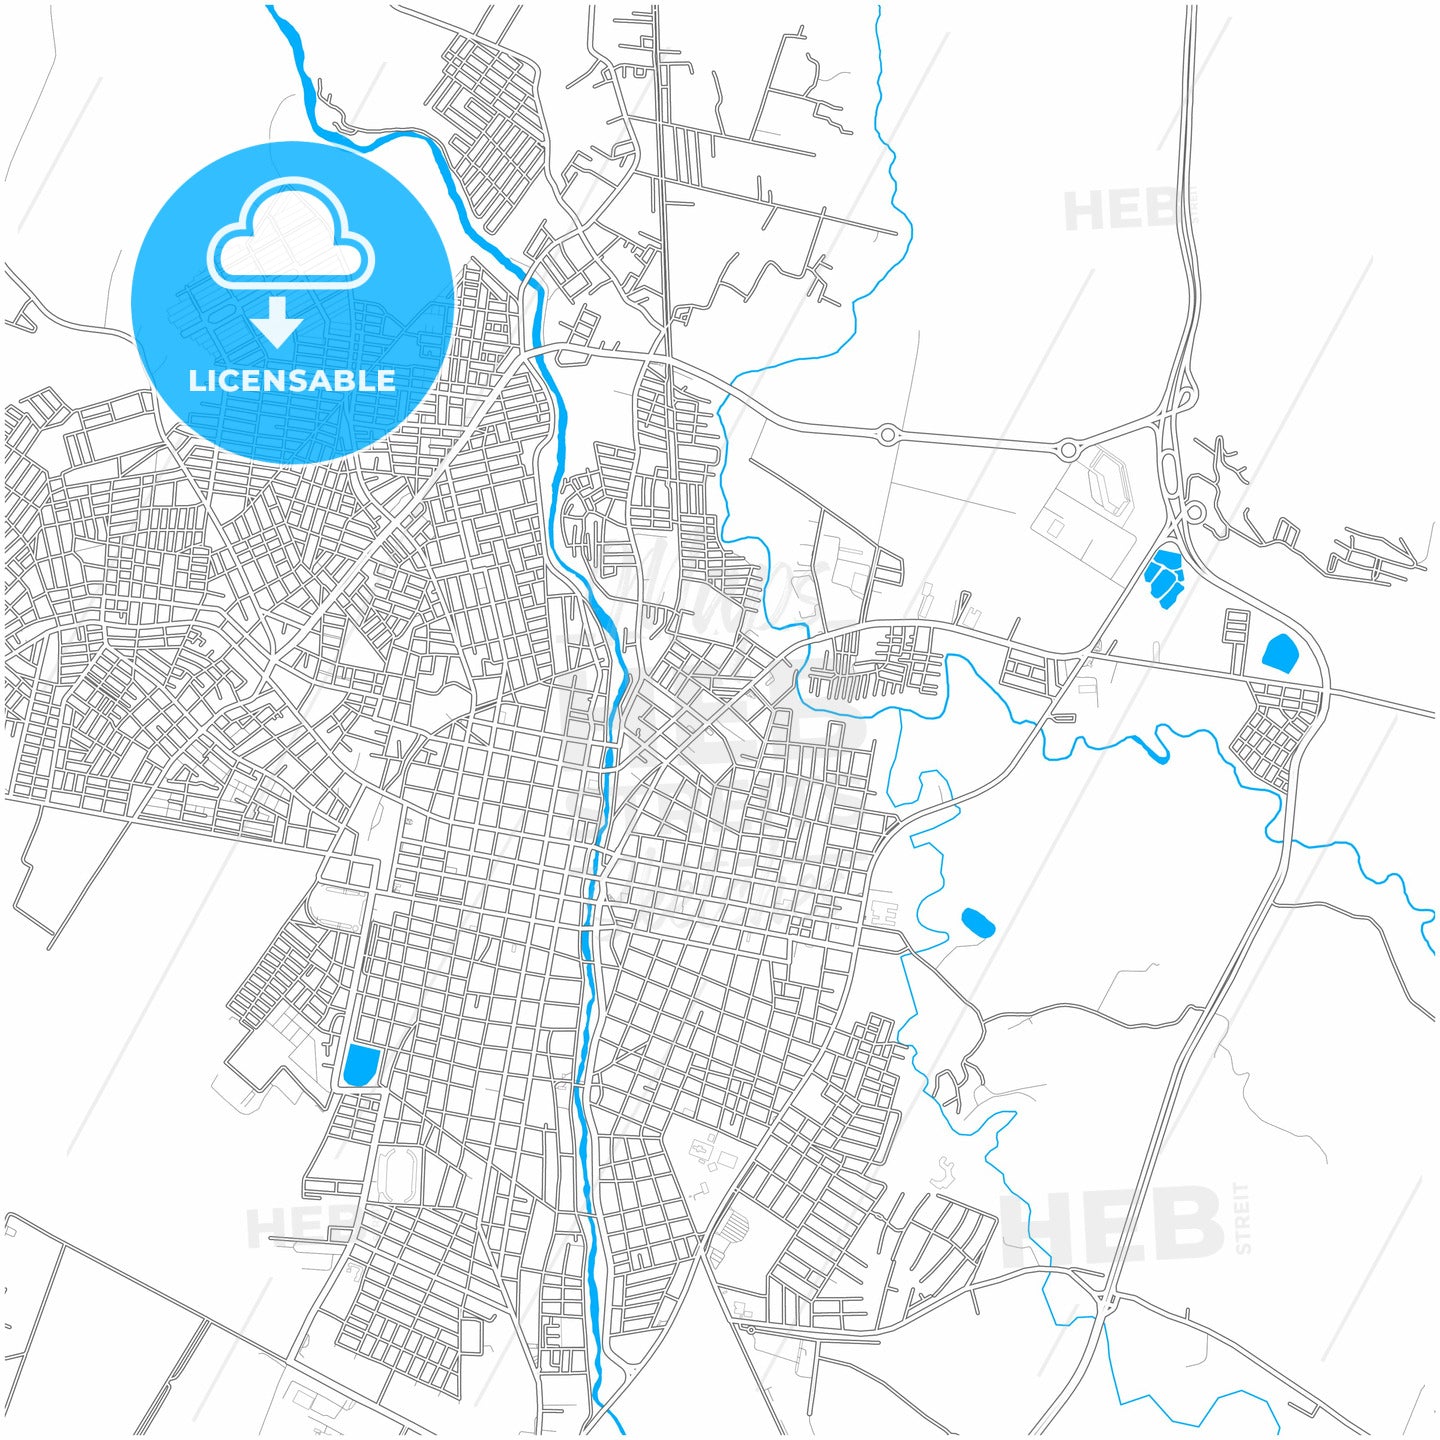 Tulua, Colombia, city map with high quality roads.